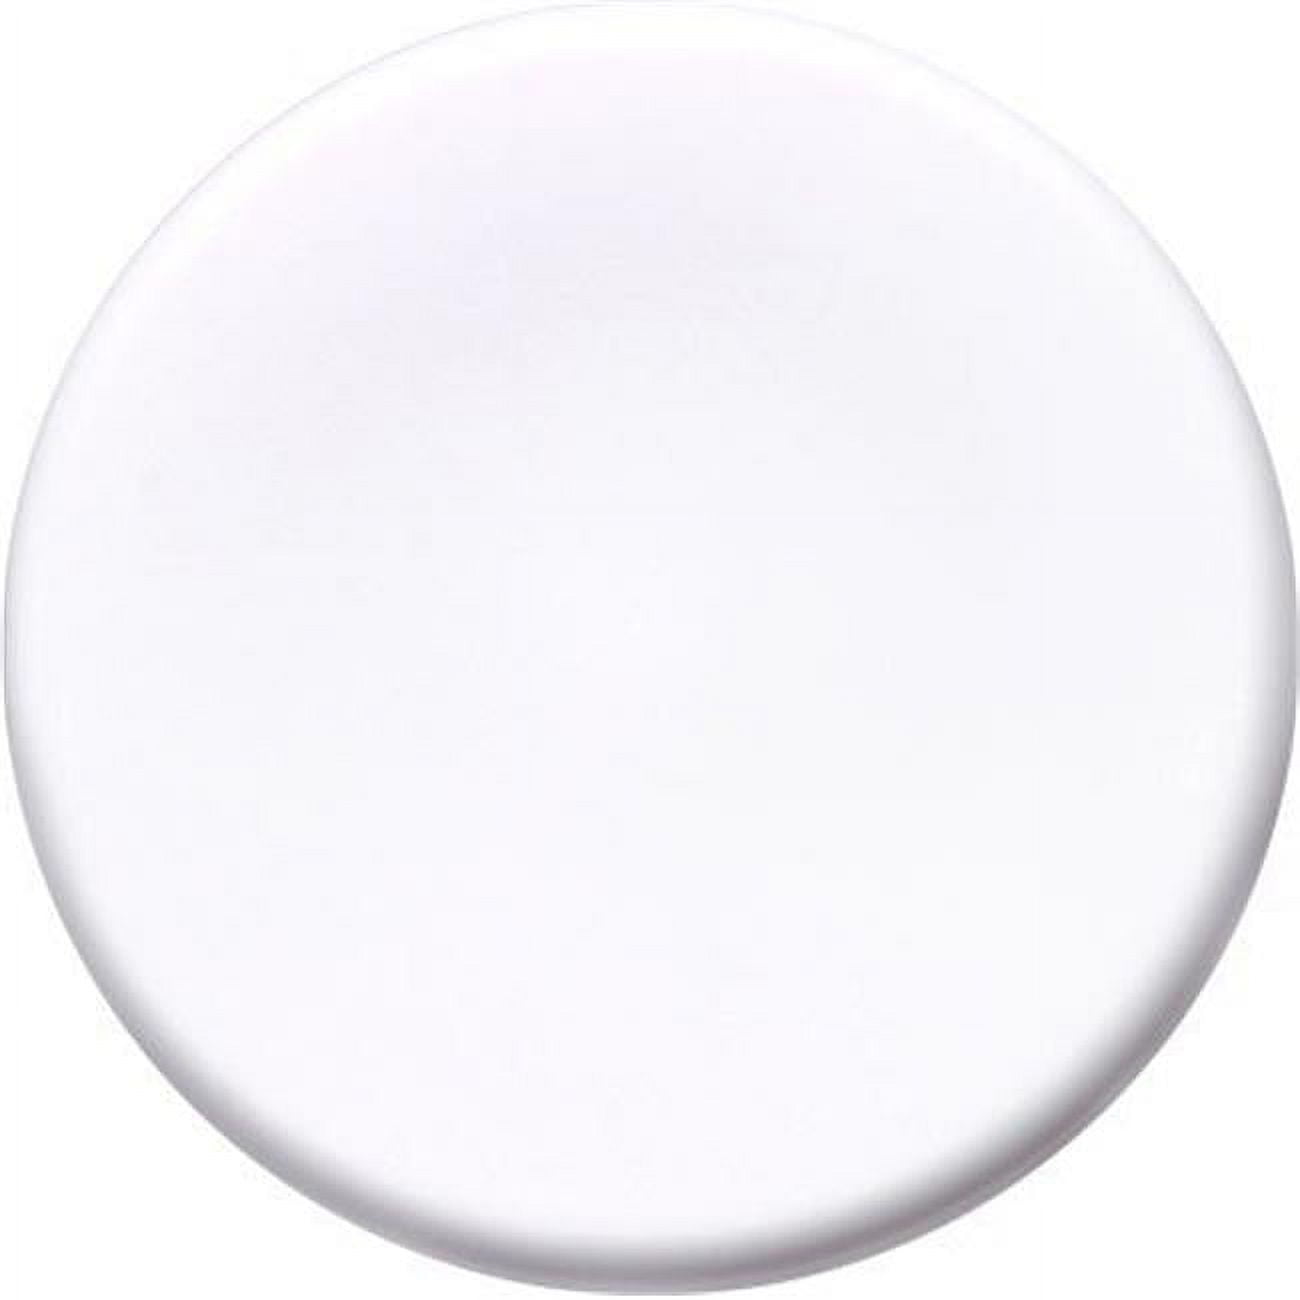 D6300 14 In. Drum Fixture 54w 120v, White